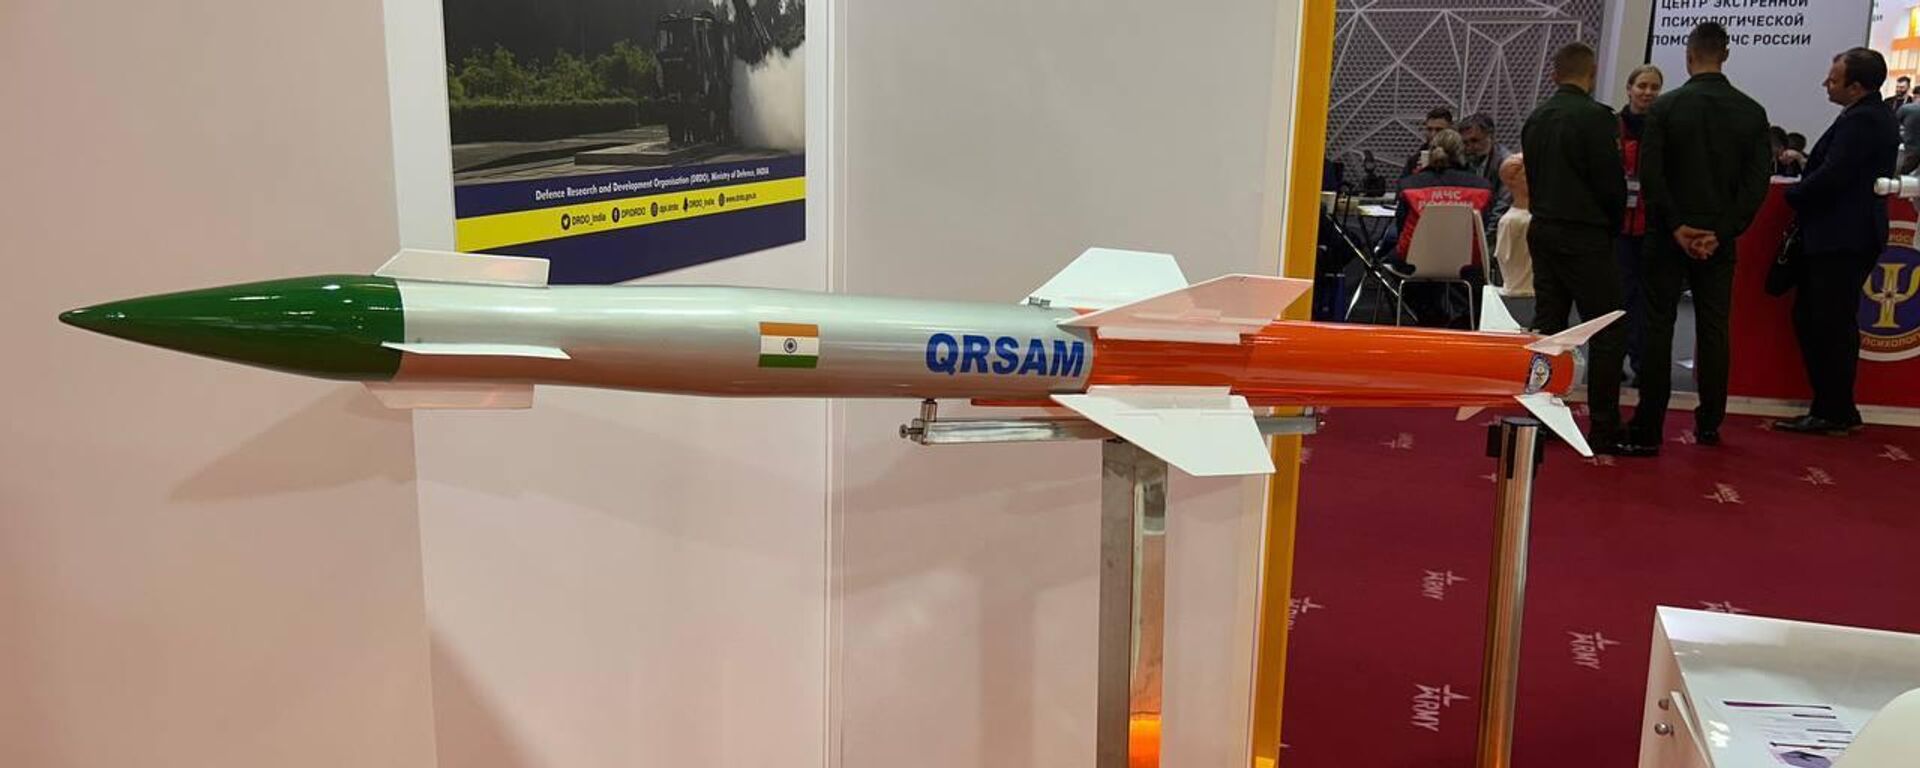 India Showcases QRSAM Anti-Aircraft Missile System at the exhibition at Army-2023 Expo - Sputnik भारत, 1920, 15.08.2023